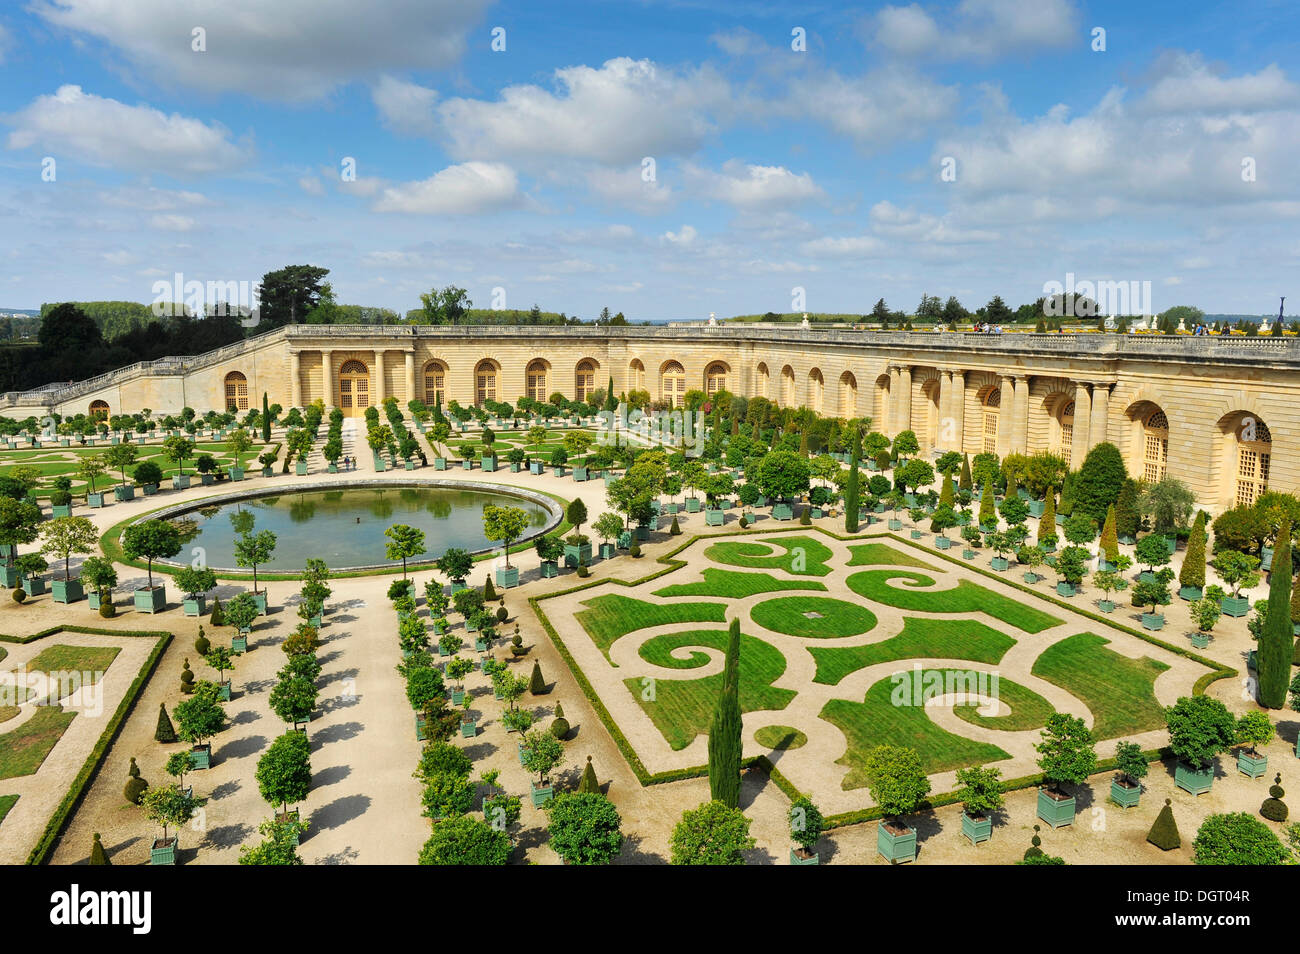 Gardens And Orangerie At The Palace Of Versailles Versailles Stock Photo Alamy